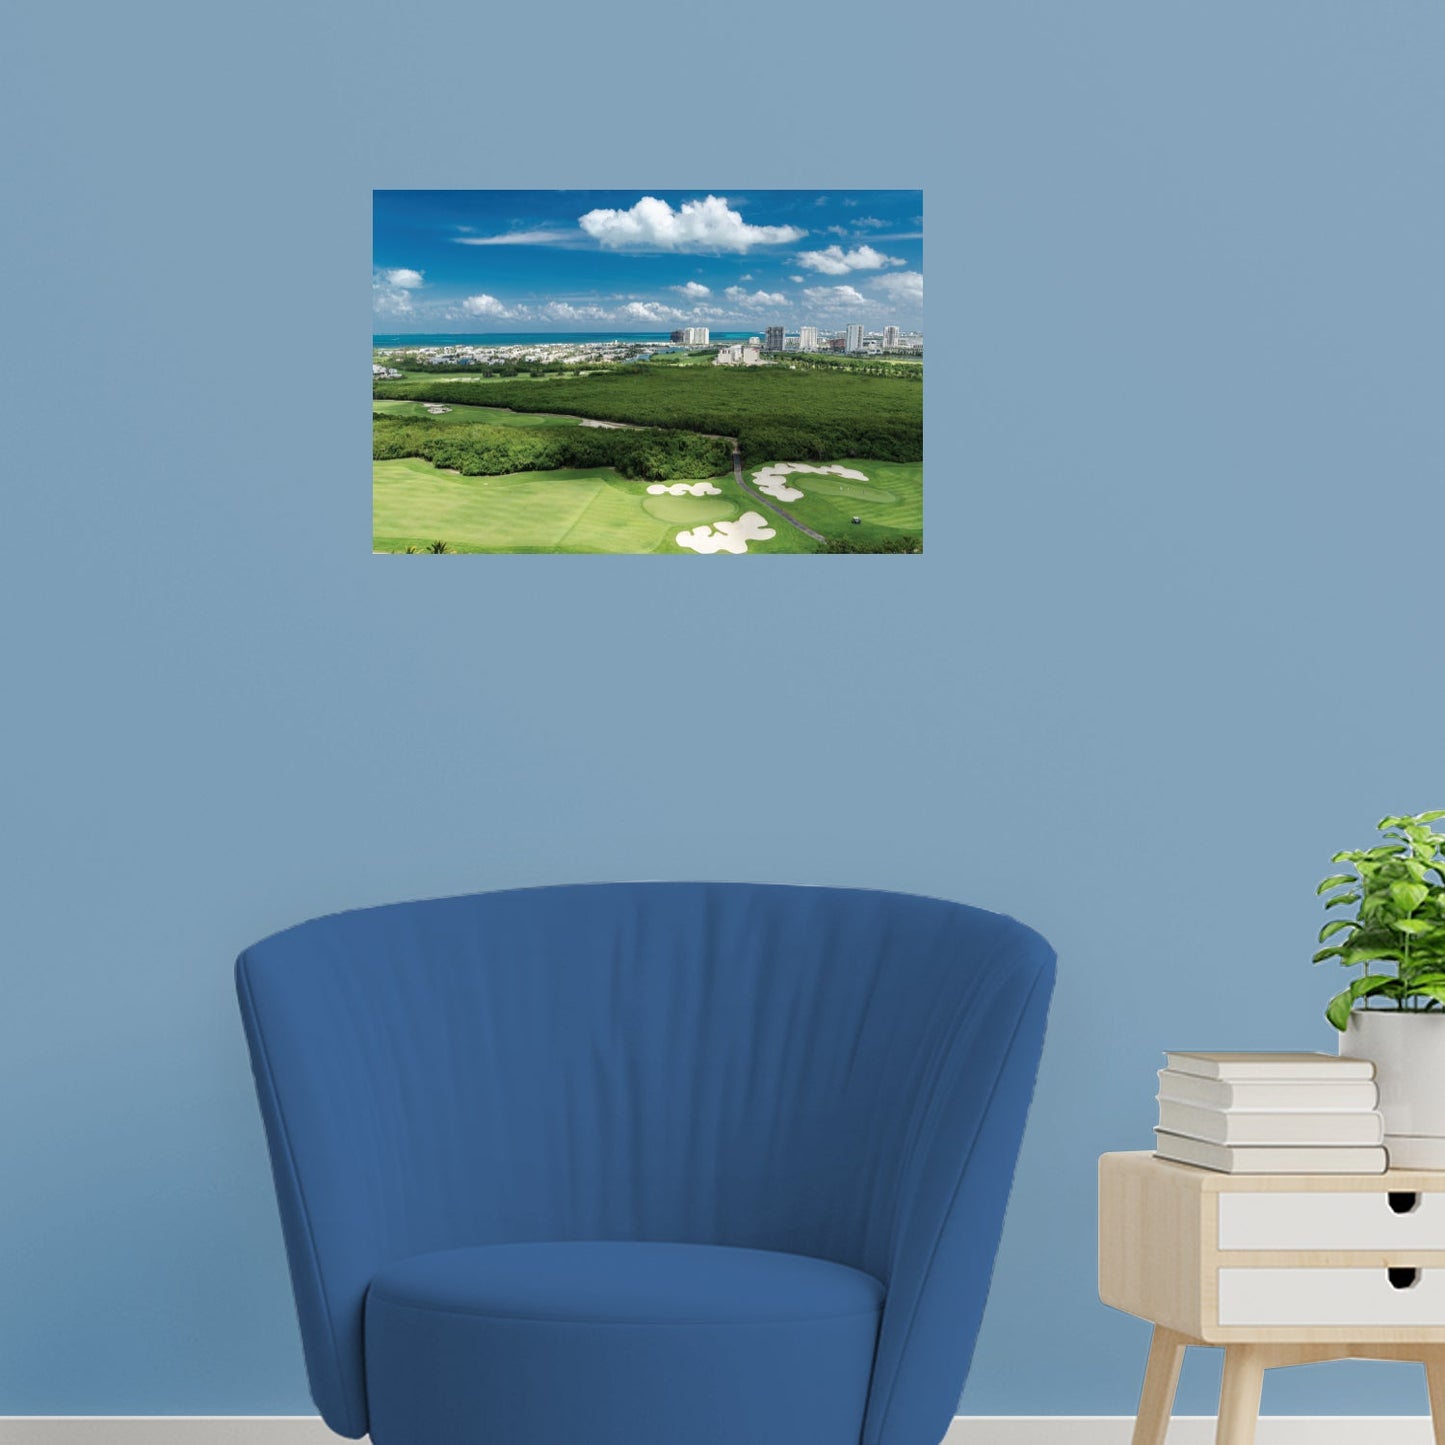 Golf: Golf Course Poster - Removable Adhesive Decal